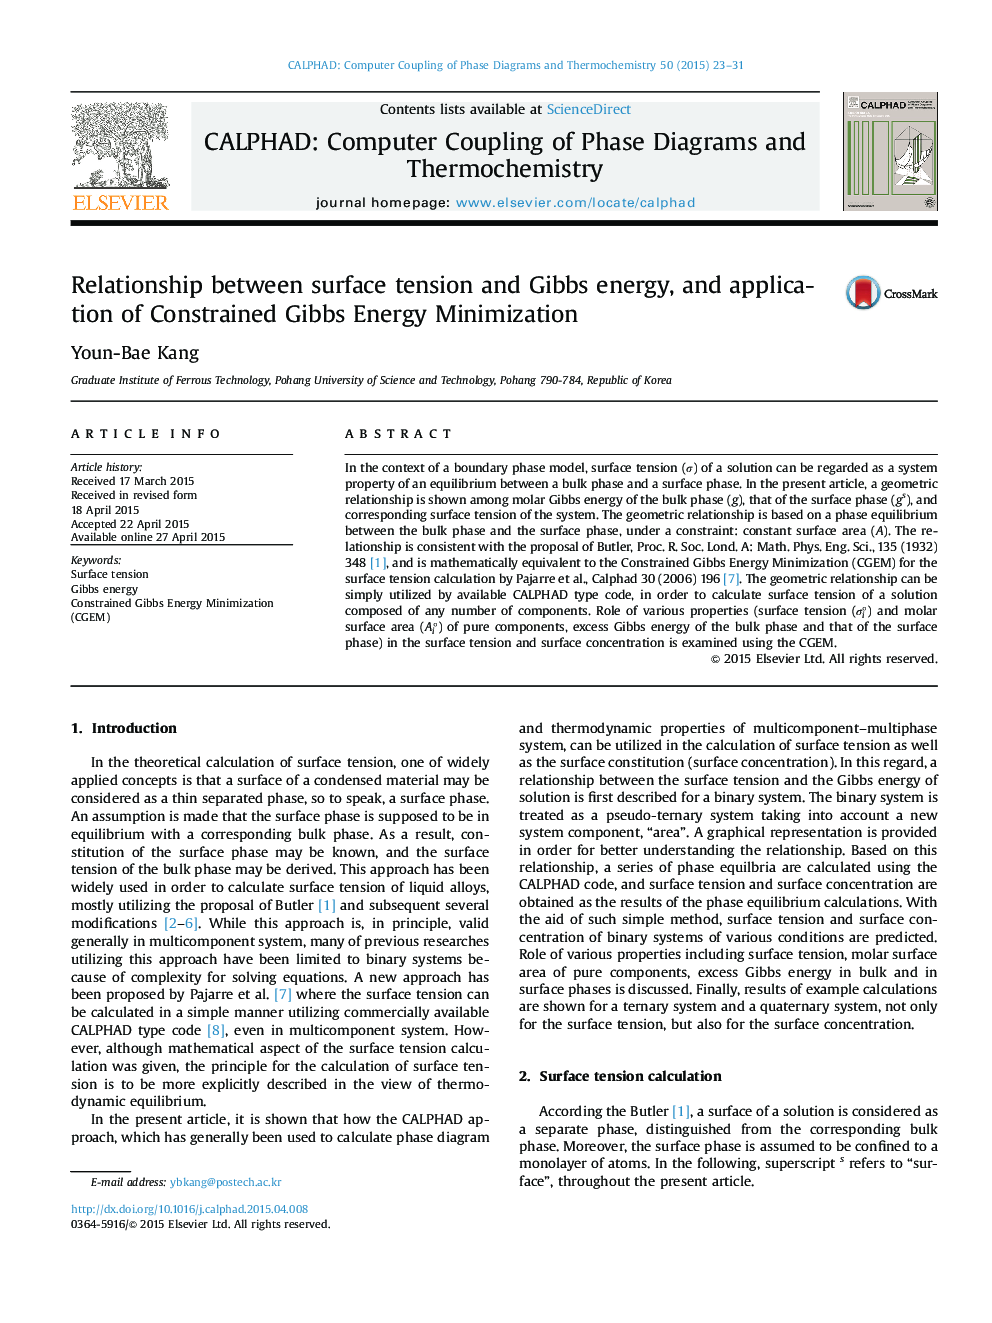 Relationship between surface tension and Gibbs energy, and application of Constrained Gibbs Energy Minimization